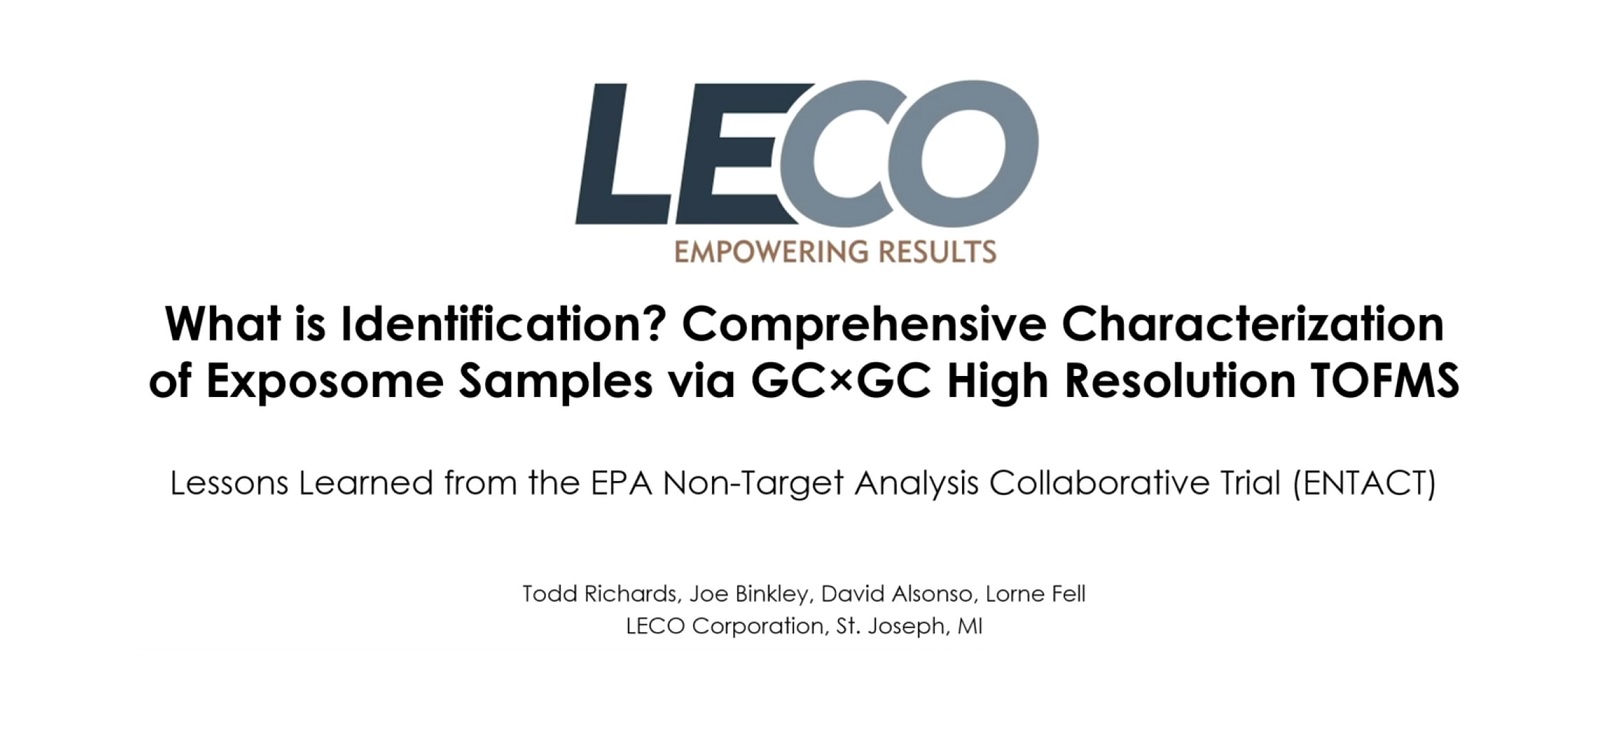 LECO: What is Identification? Comprehensive Characterization of Exposome Samples via GCxGC High Resolution TOFMS